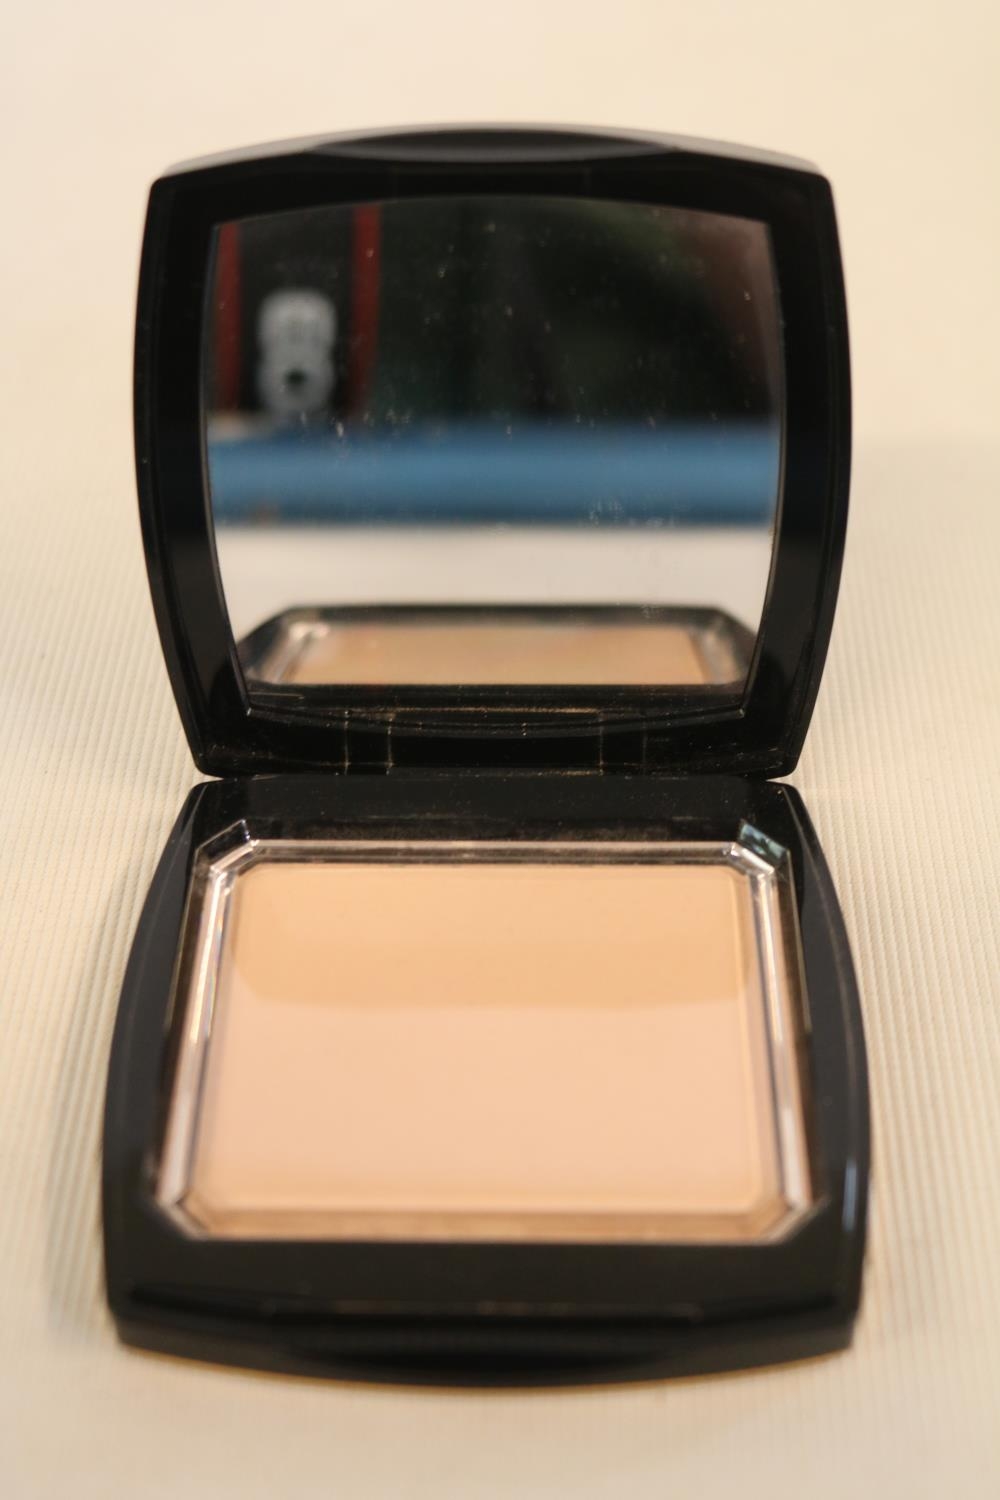 Christian Dior of Paris Refillable Luxury Powder Compact Boxed and a Chanel Compact - Image 4 of 5